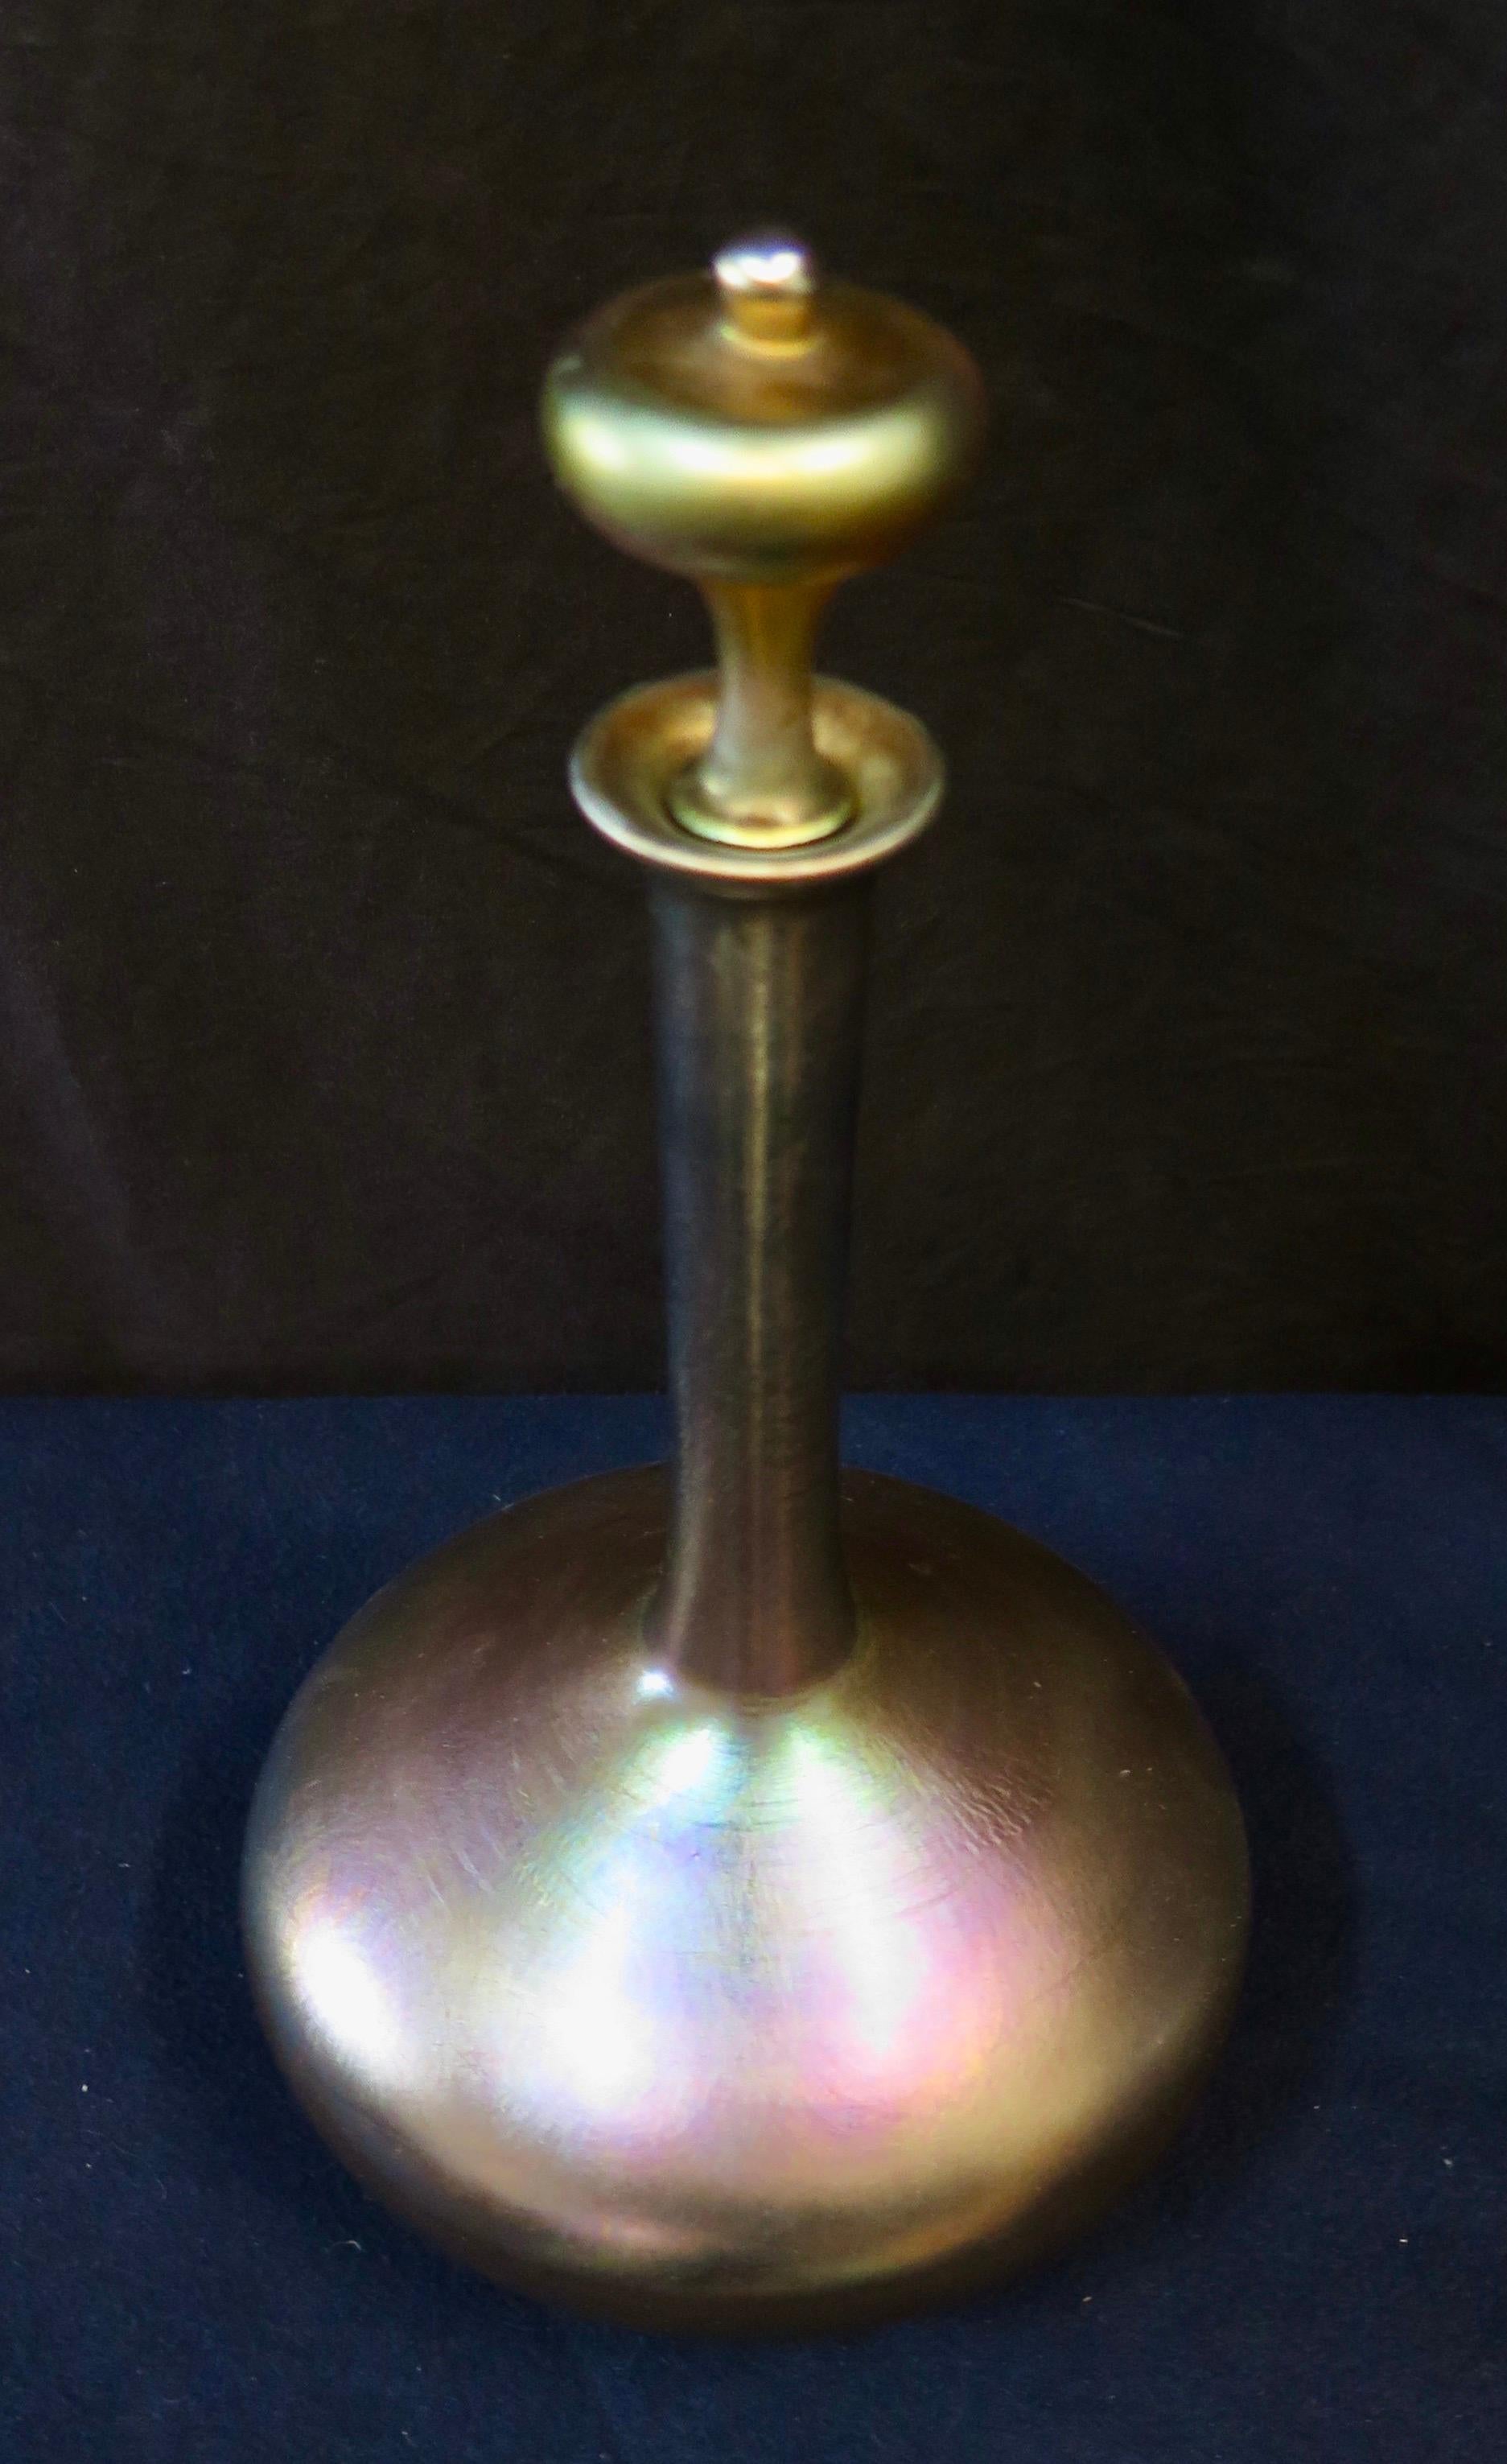 This vintage early 20th century favrile art glass decanter was produced by the Tiffany Studios, New York. The iridescent decanter features a long slender neck that flows down to a large bulbous shape base. An elegant handmade stopper marked 957